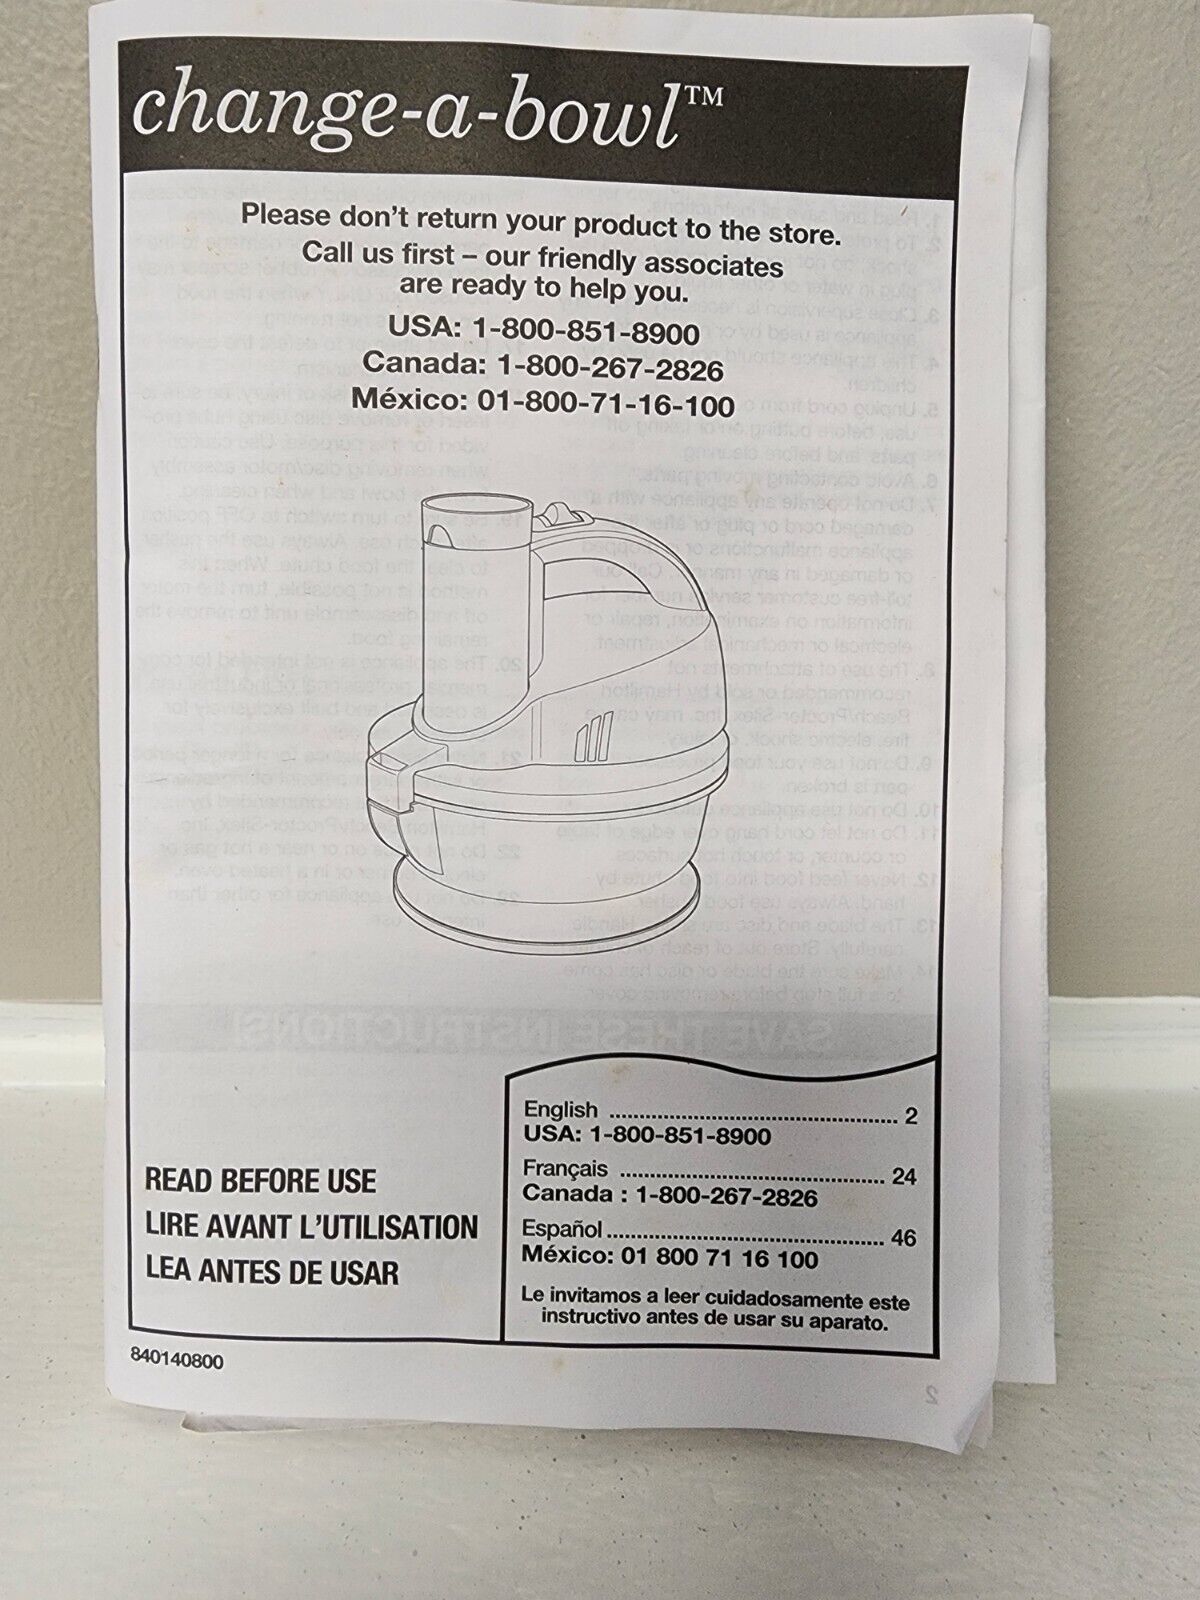 Hamilton Beach Change A Bowl 70800 Quick Start Guide and Instruction Manual - $7.87